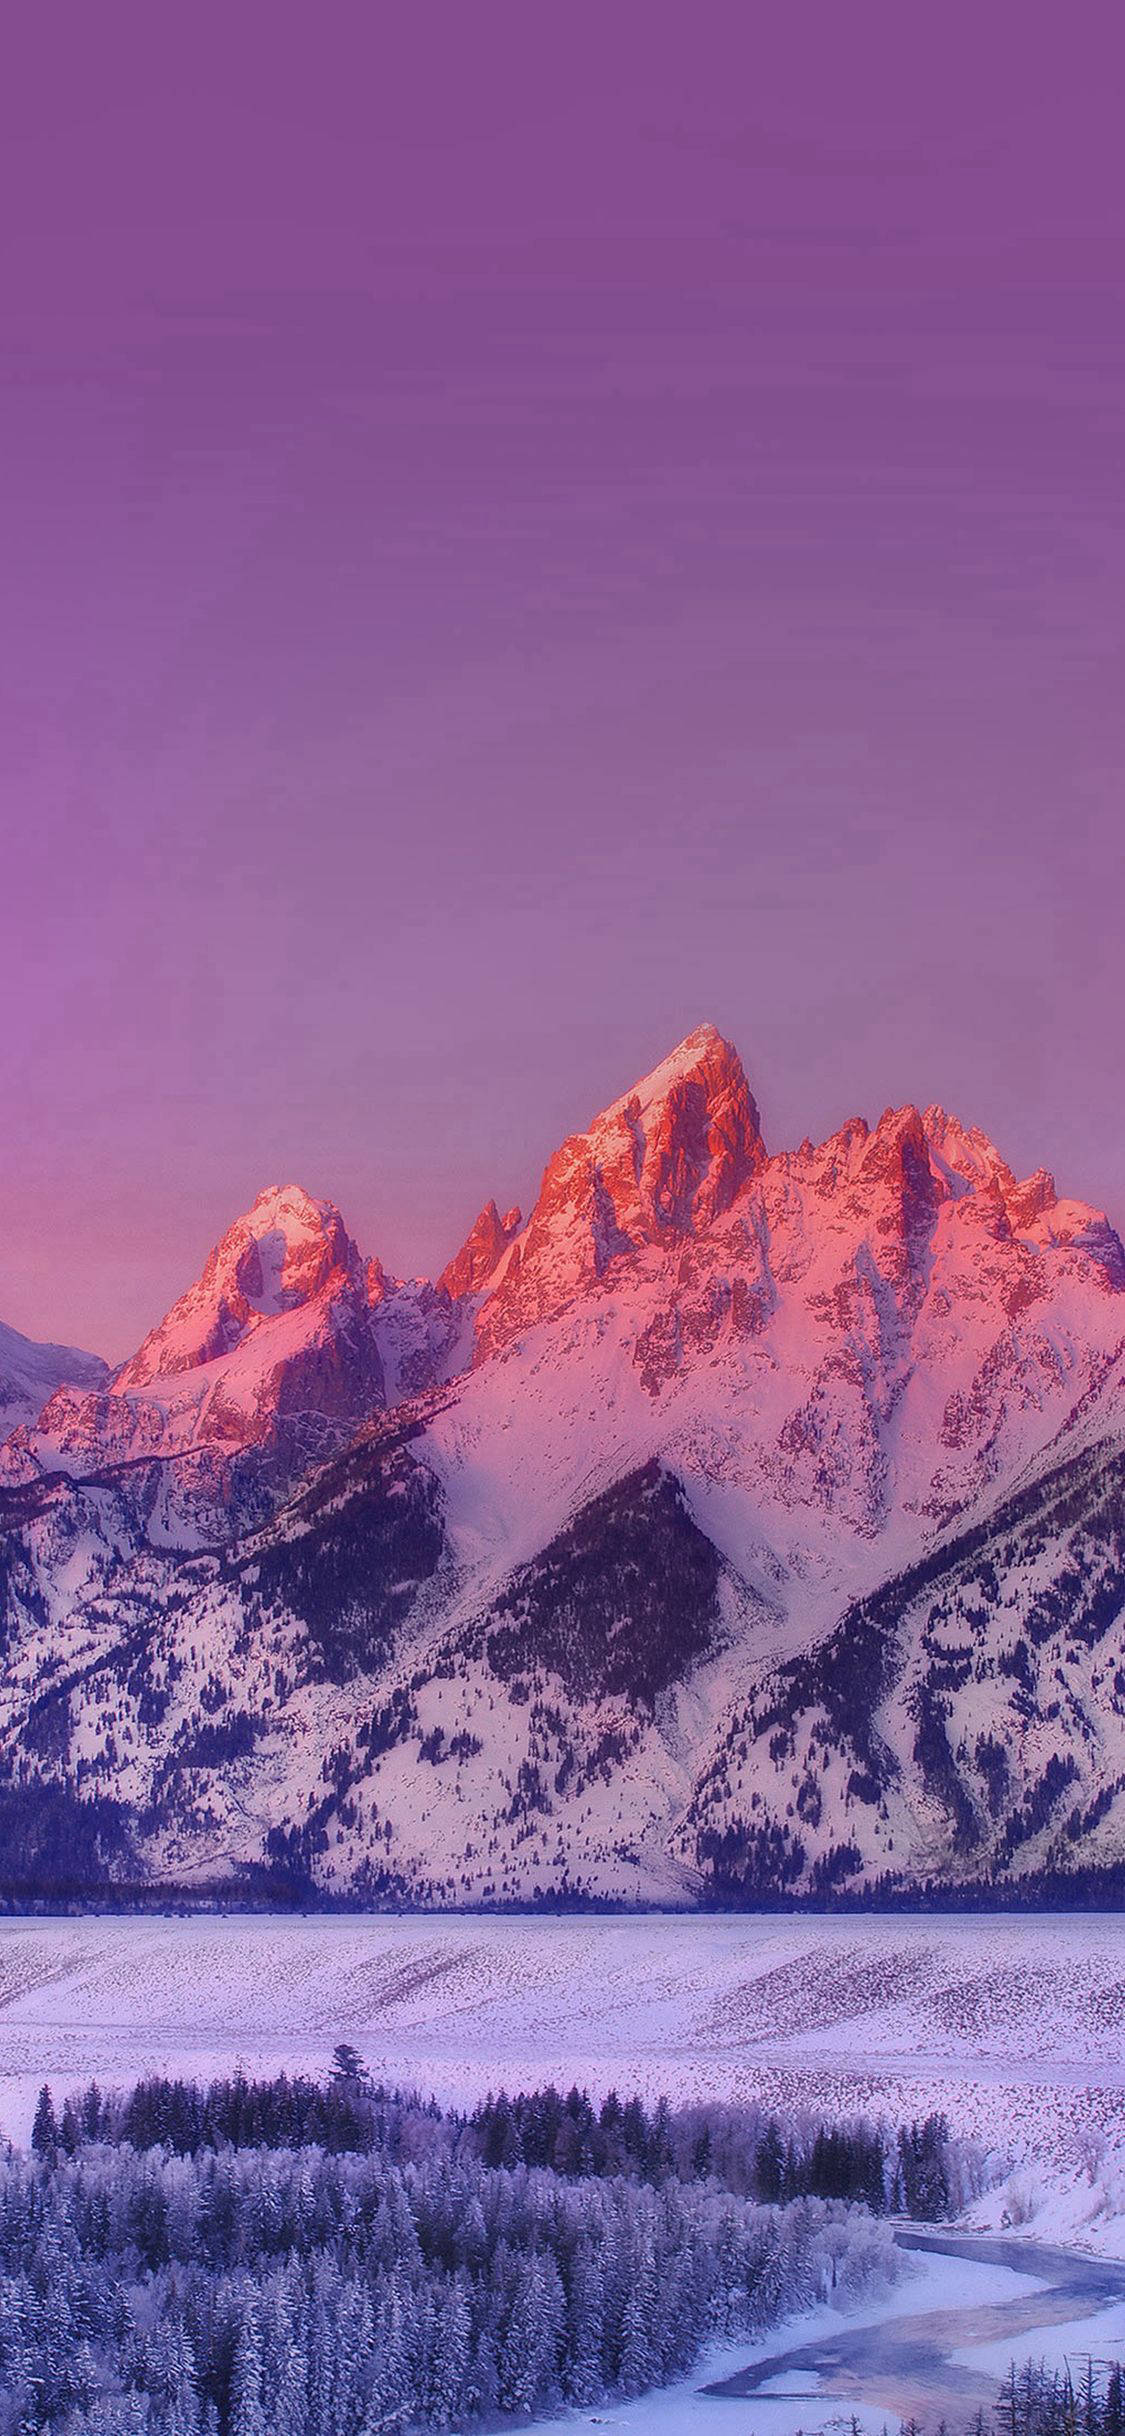 IPhone wallpaper of a snow covered mountain range during sunset - Mountain